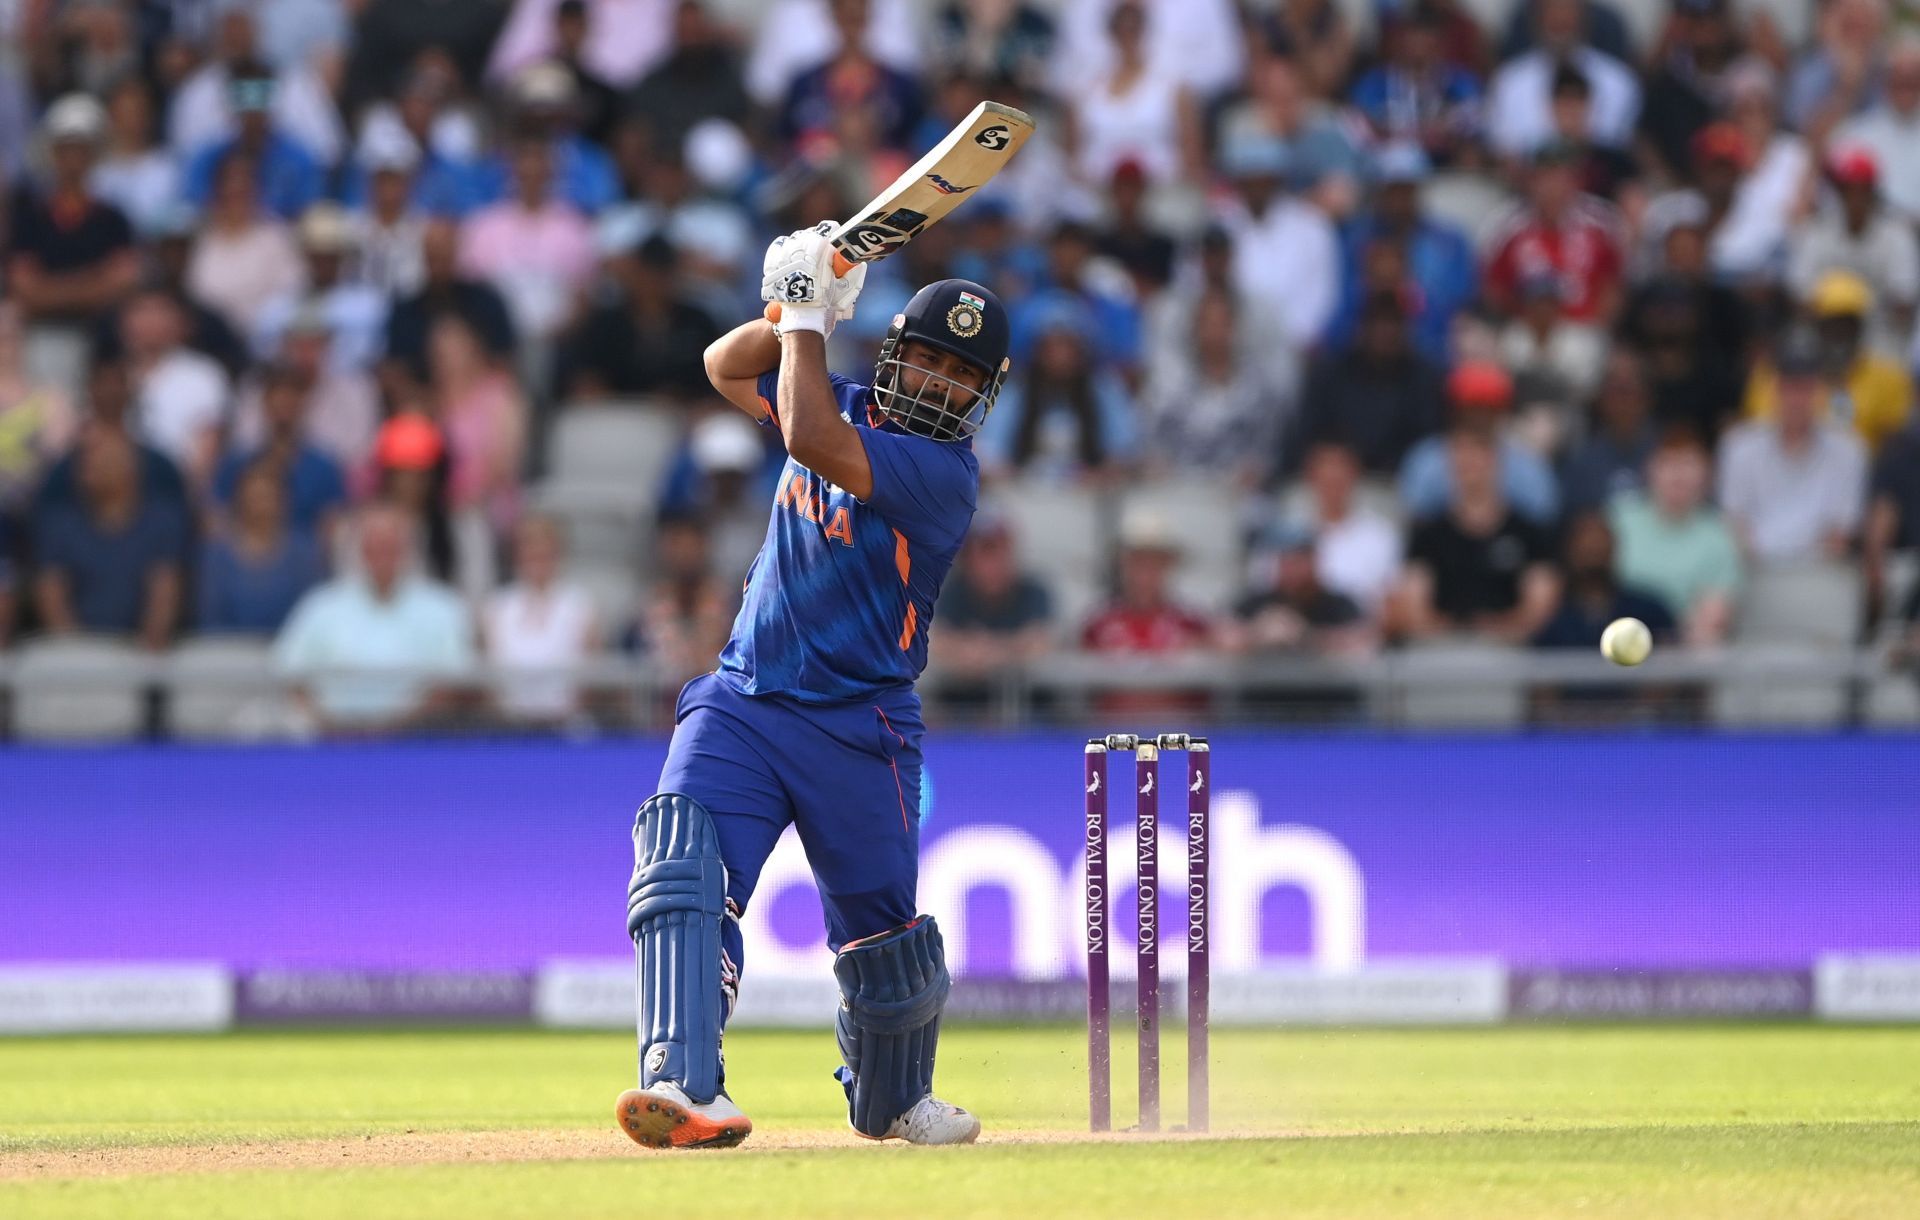 Rishabh Pant top-scored for India with a 31-ball 44